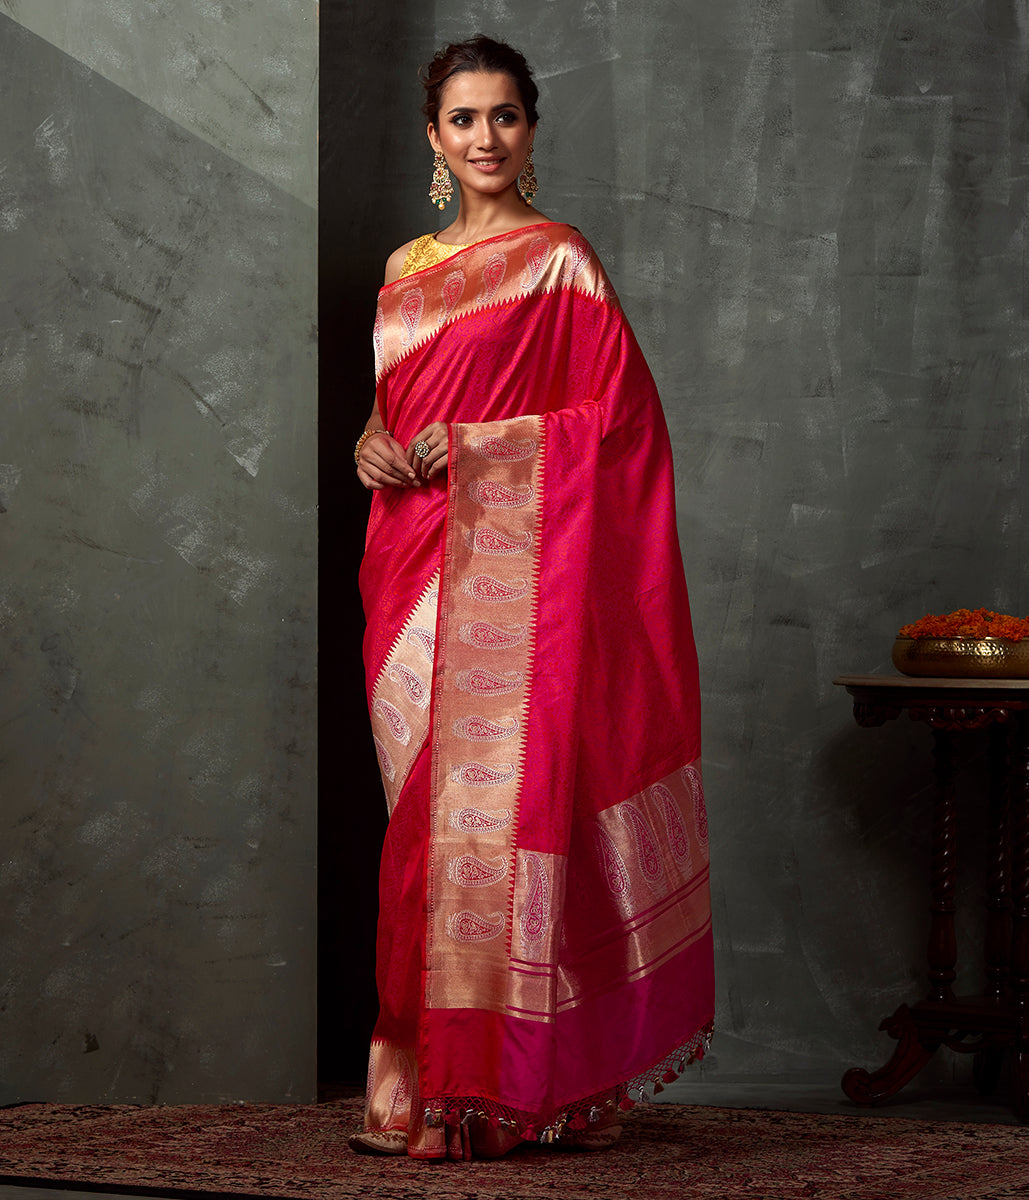 Hot_Pink_Self_Weave_Tanchoi_Saree_with_Gold_and_Silver_Zari_Paisleys_on_the_Border_WeaverStory_02